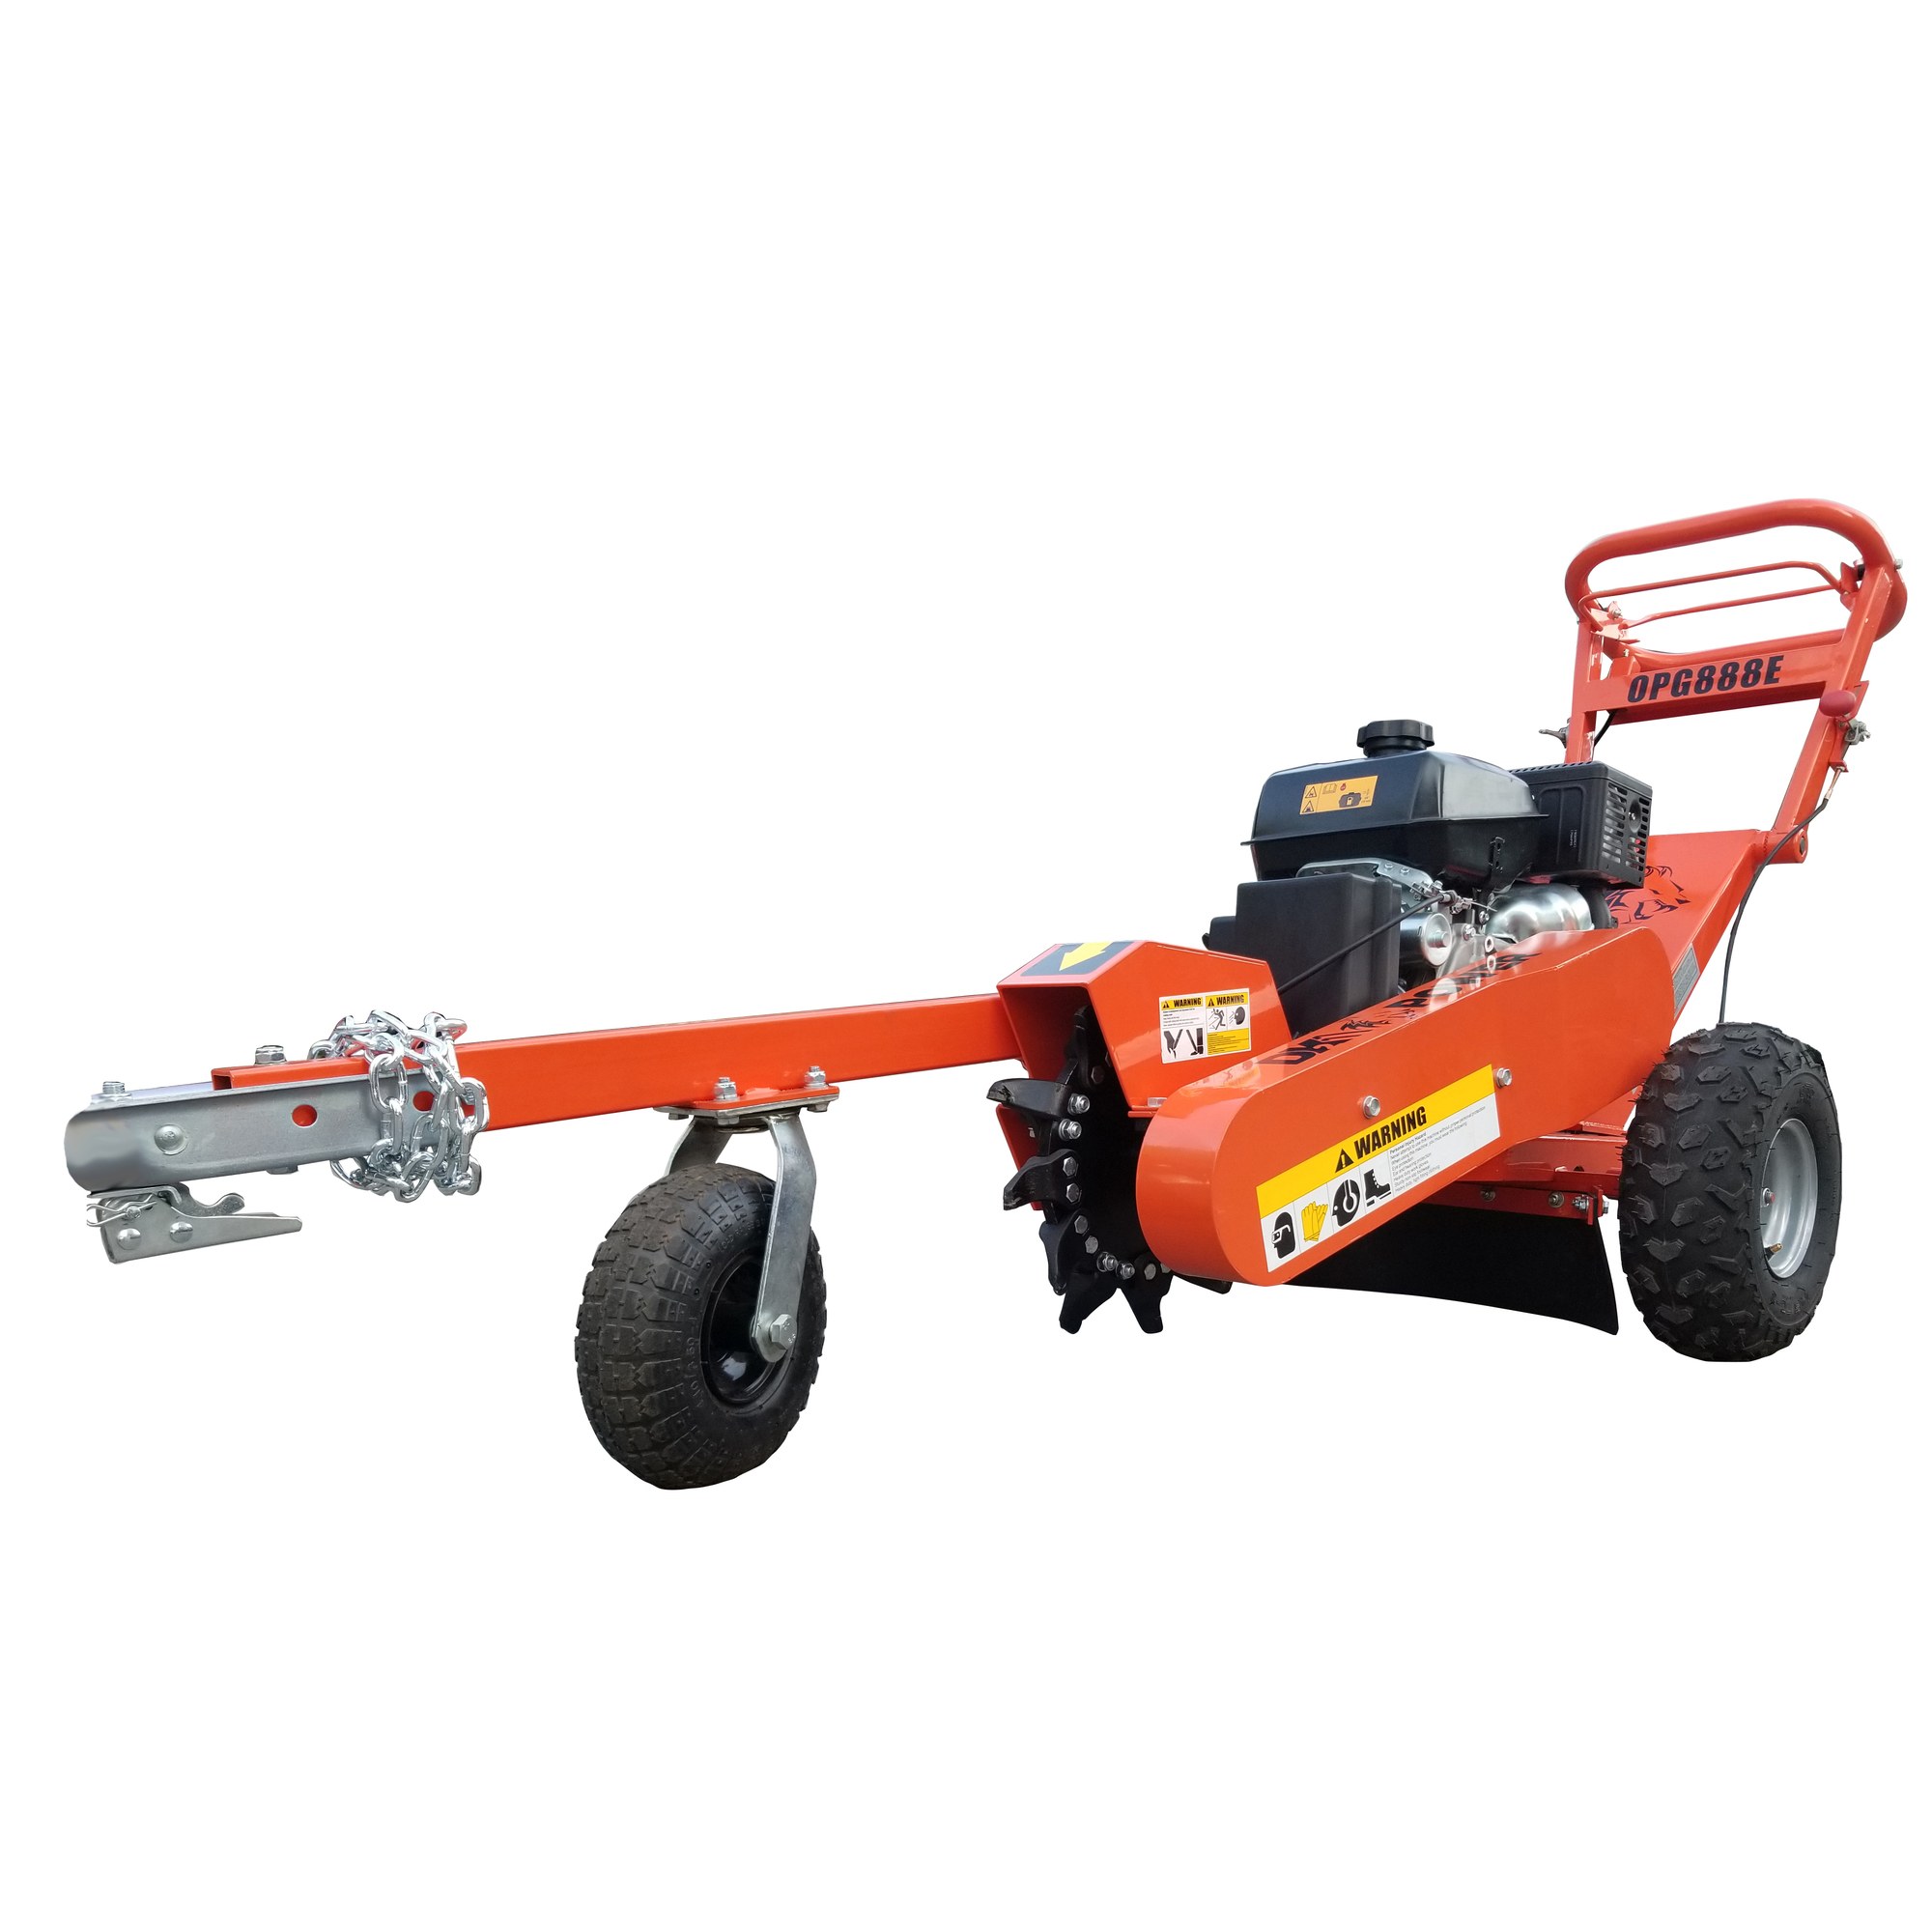 DK2 Power, Stump grinder 14hp 14Inch electric start commercial, Engine Displacement 429 cc, Horsepower 14, Max. Cutting Thickness 4 in, Model OPG888E